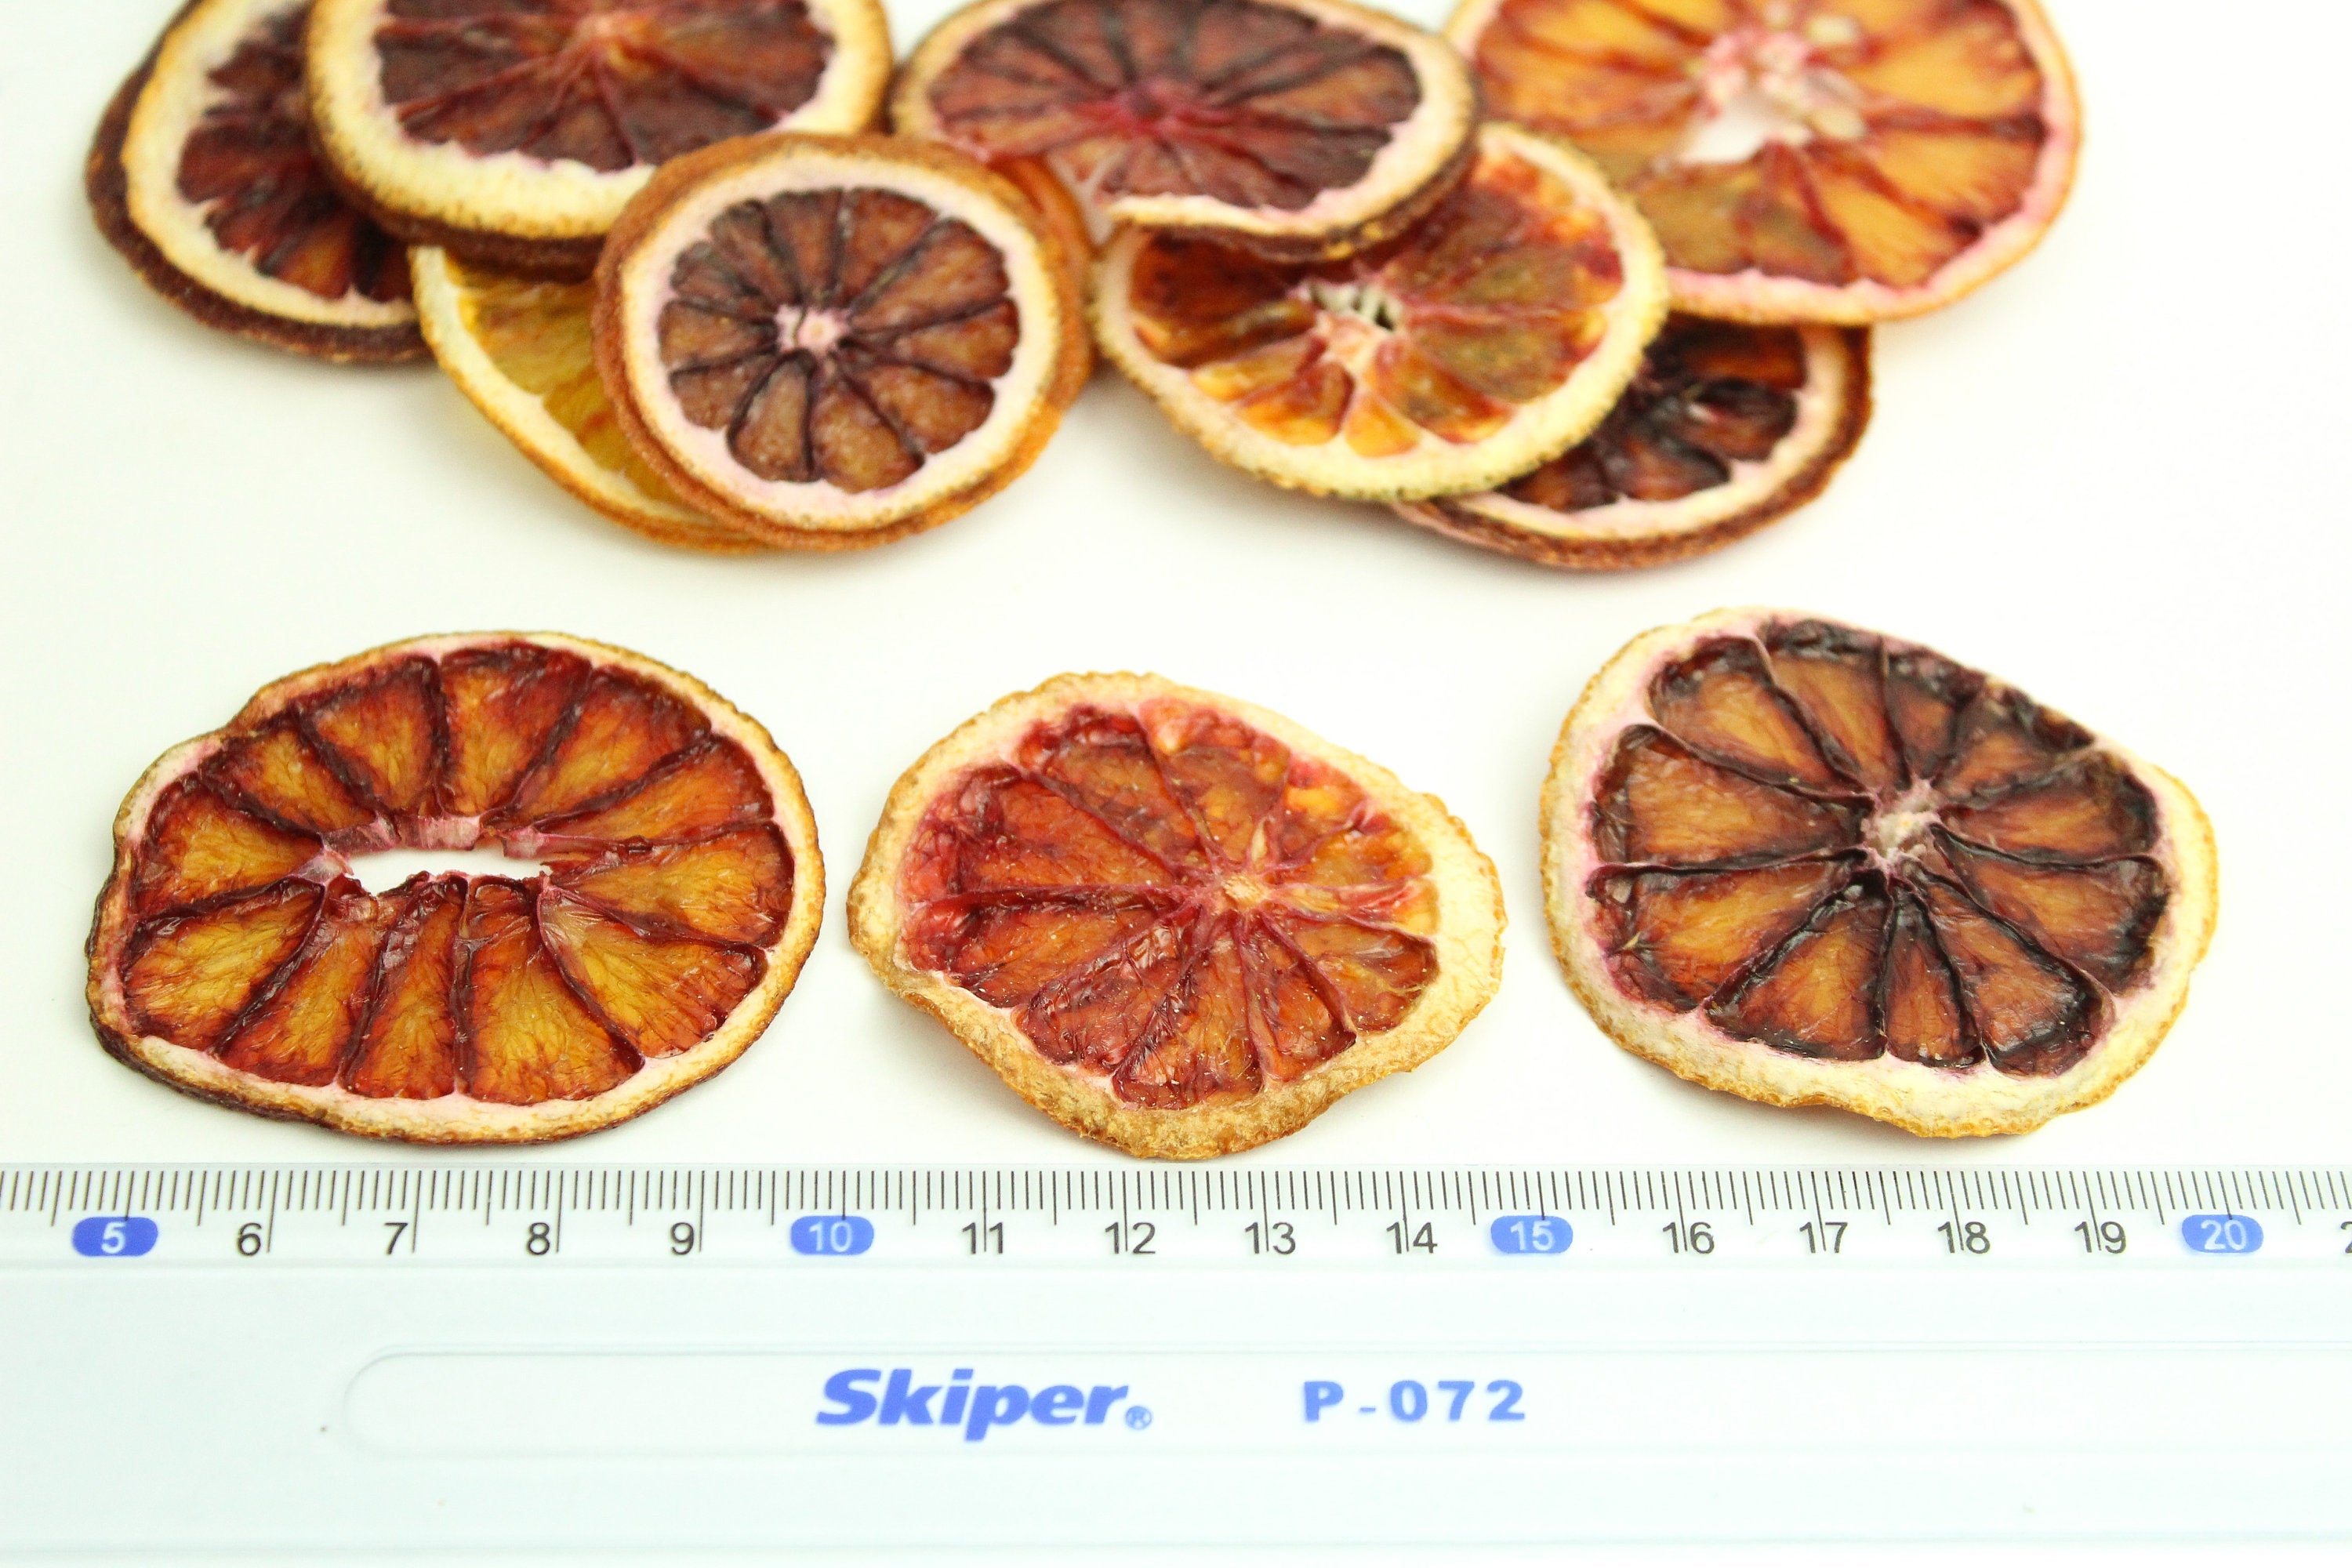 10 pcs of Dried Blood Orange Slices, Organic, 100% Natural, Air-Dried, No artificial colors and additives